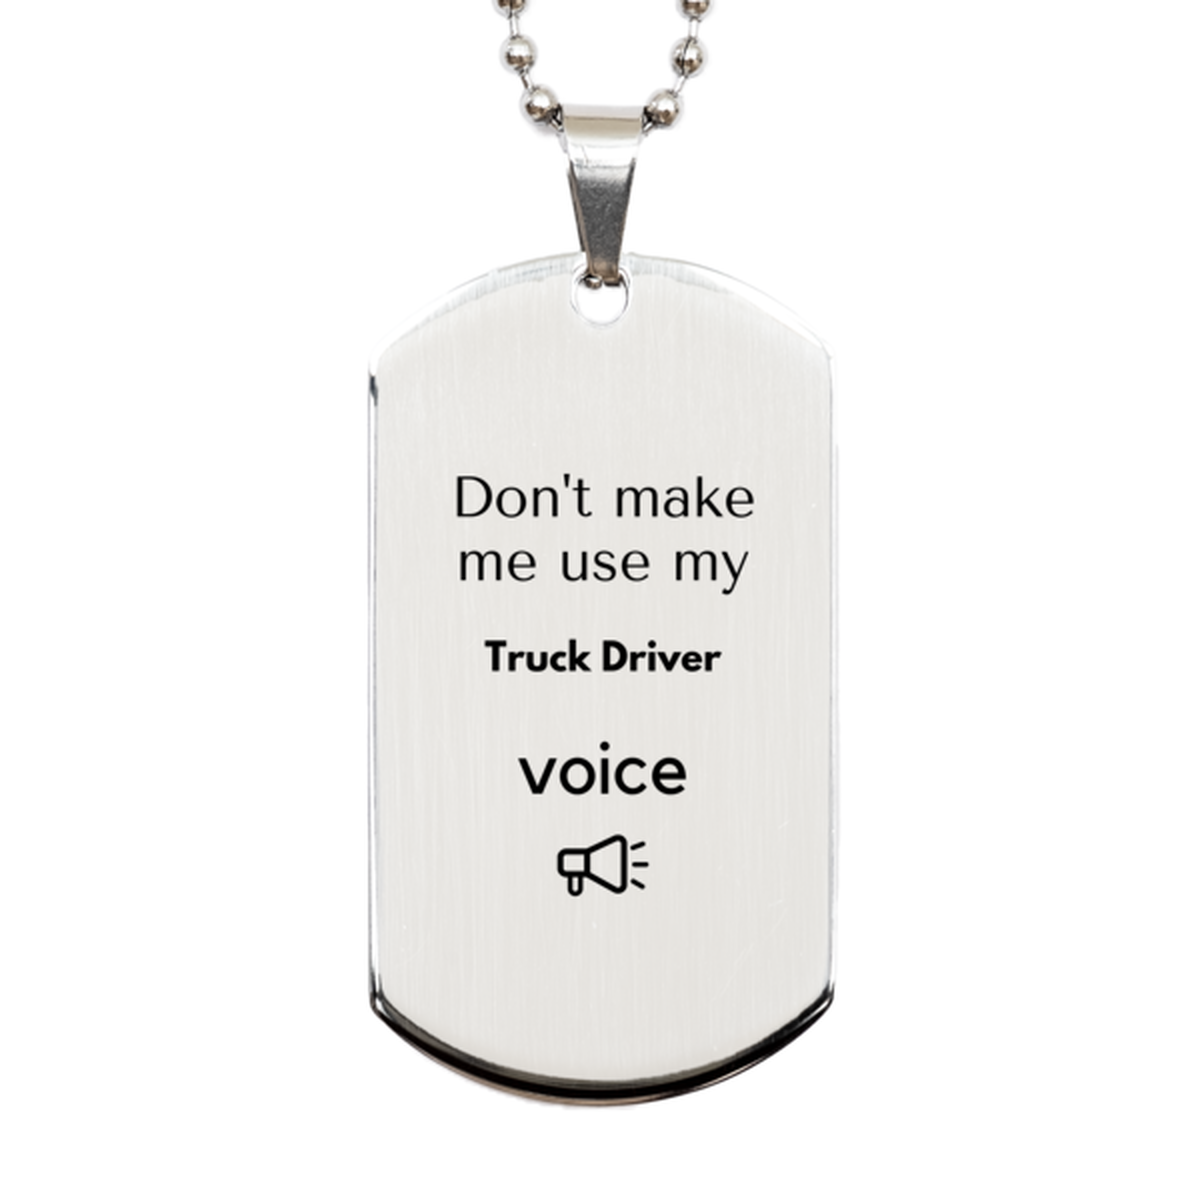 Don't make me use my Truck Driver voice, Sarcasm Truck Driver Gifts, Christmas Truck Driver Silver Dog Tag Birthday Unique Gifts For Truck Driver Coworkers, Men, Women, Colleague, Friends